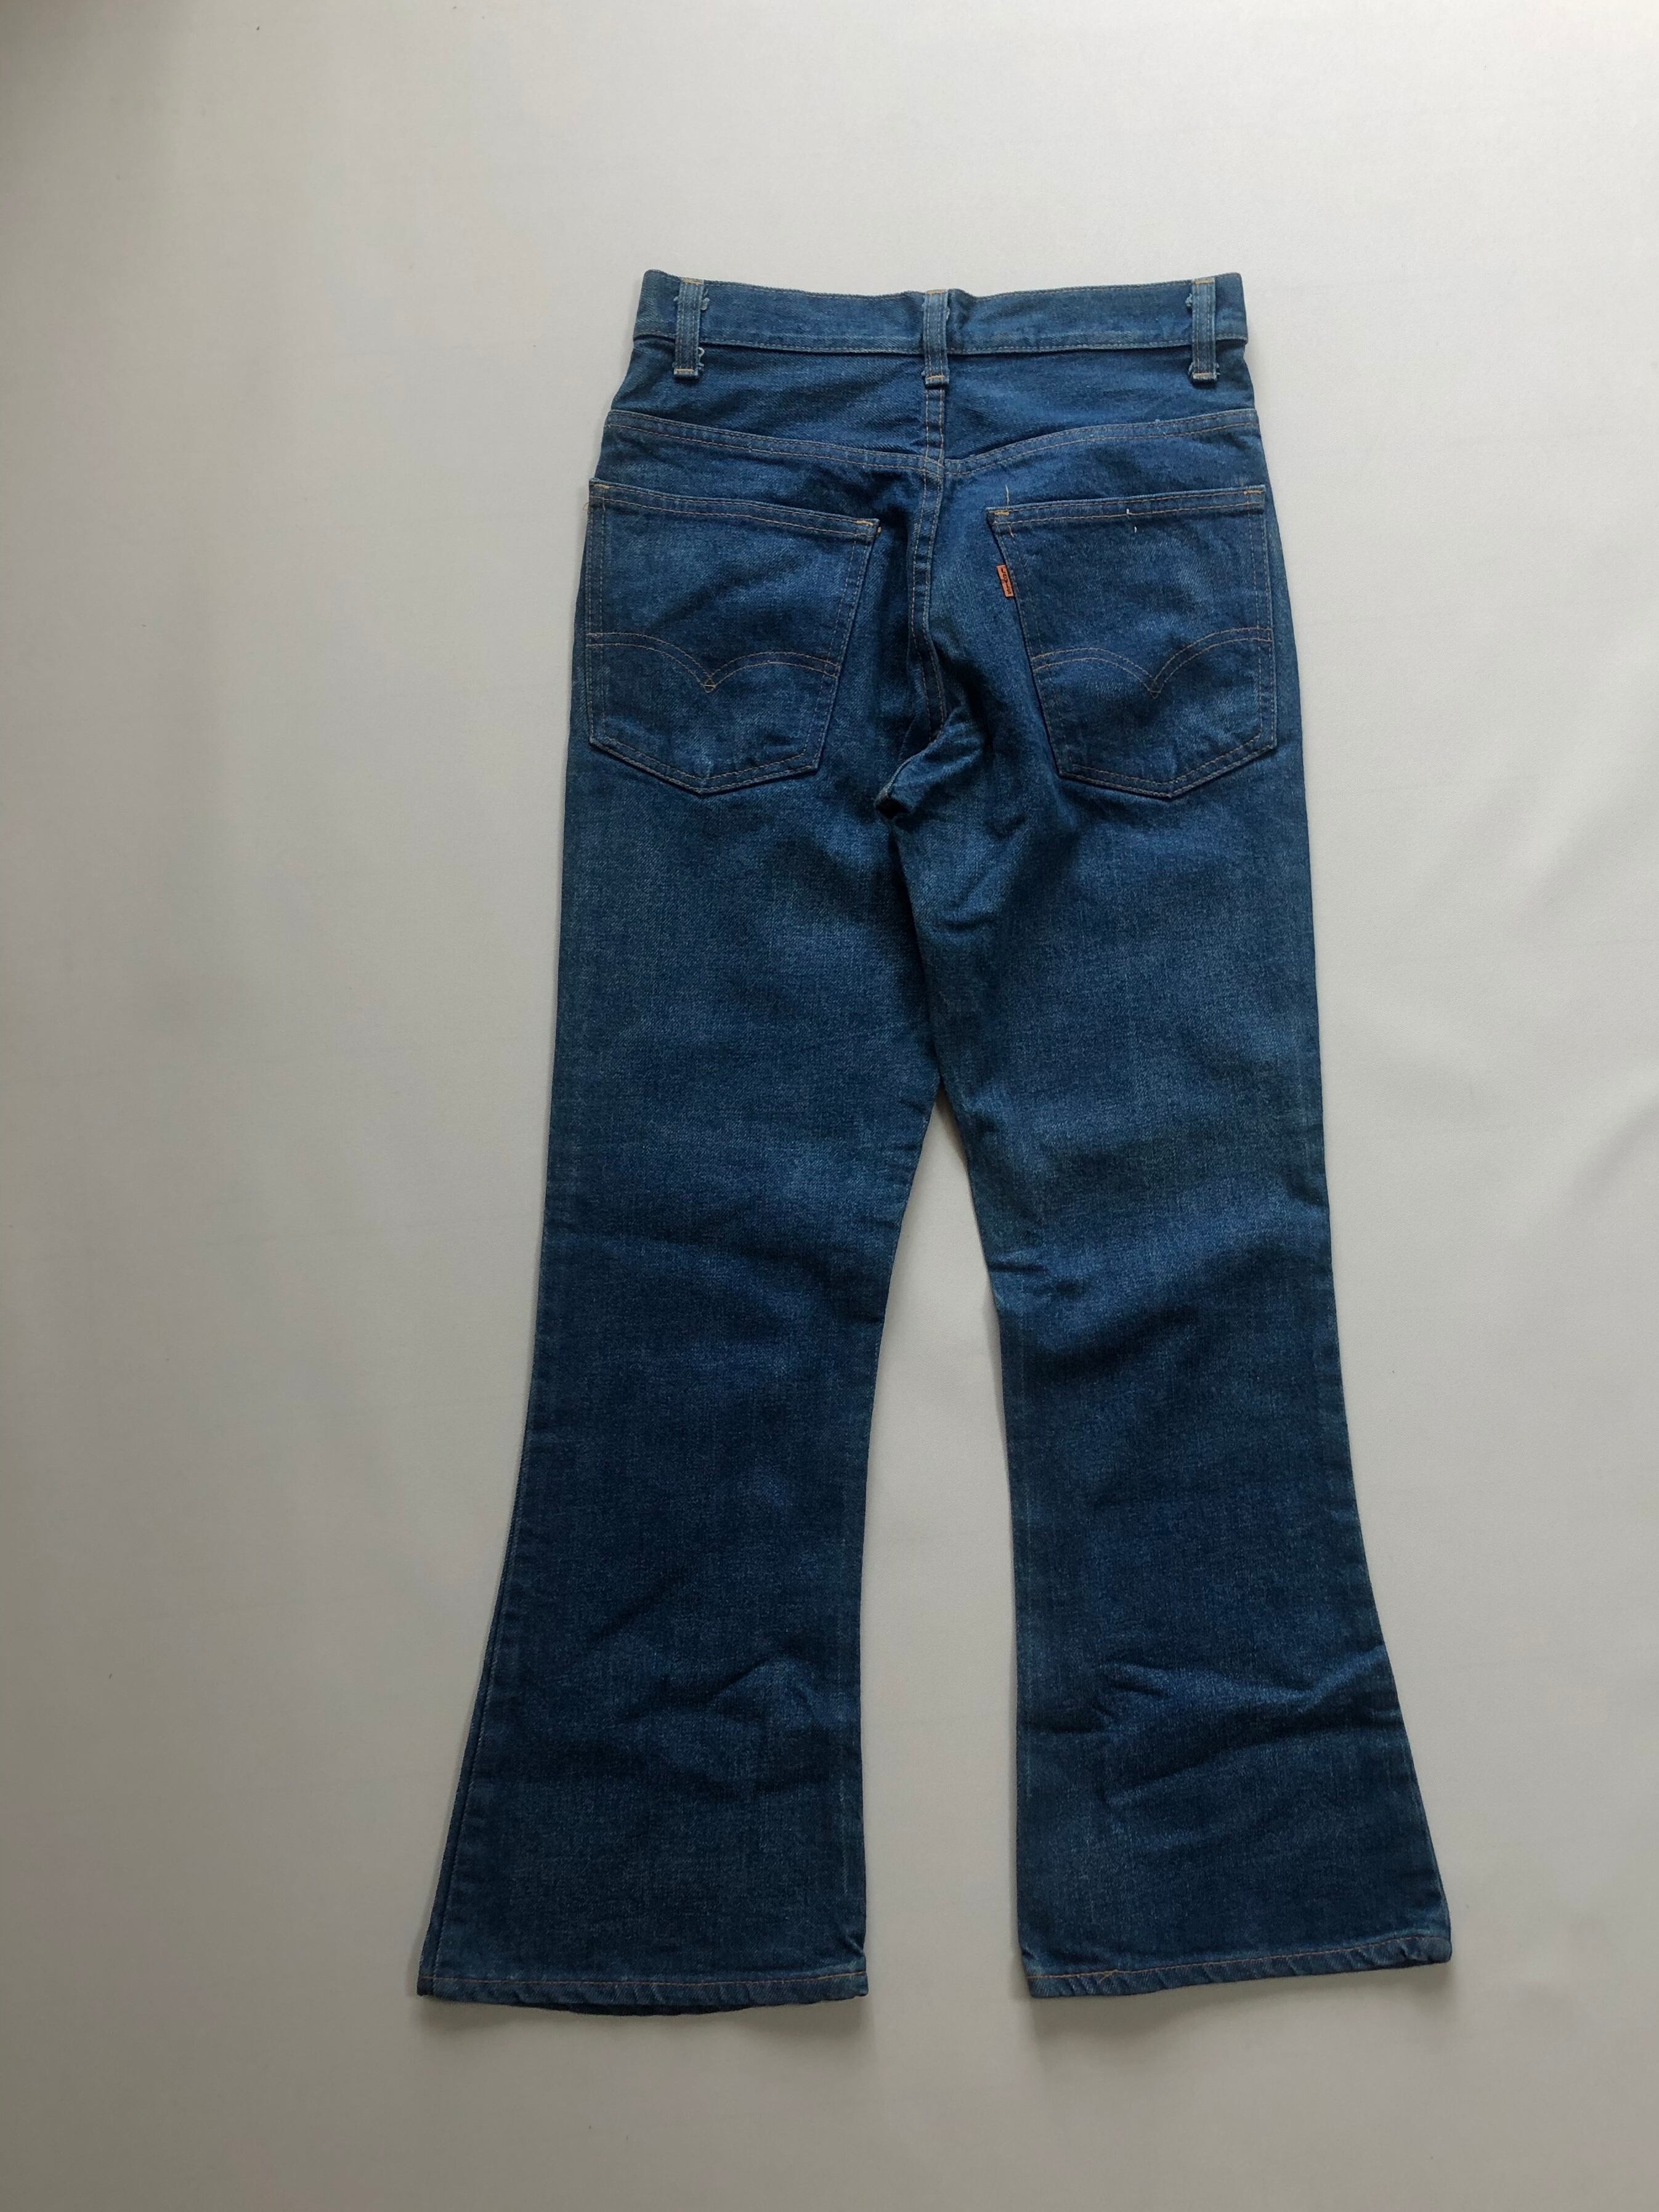 W29 70's USA製！LEVI'S リーバイス 646 160 | ＳＥＣＯＮＤ HAND RED